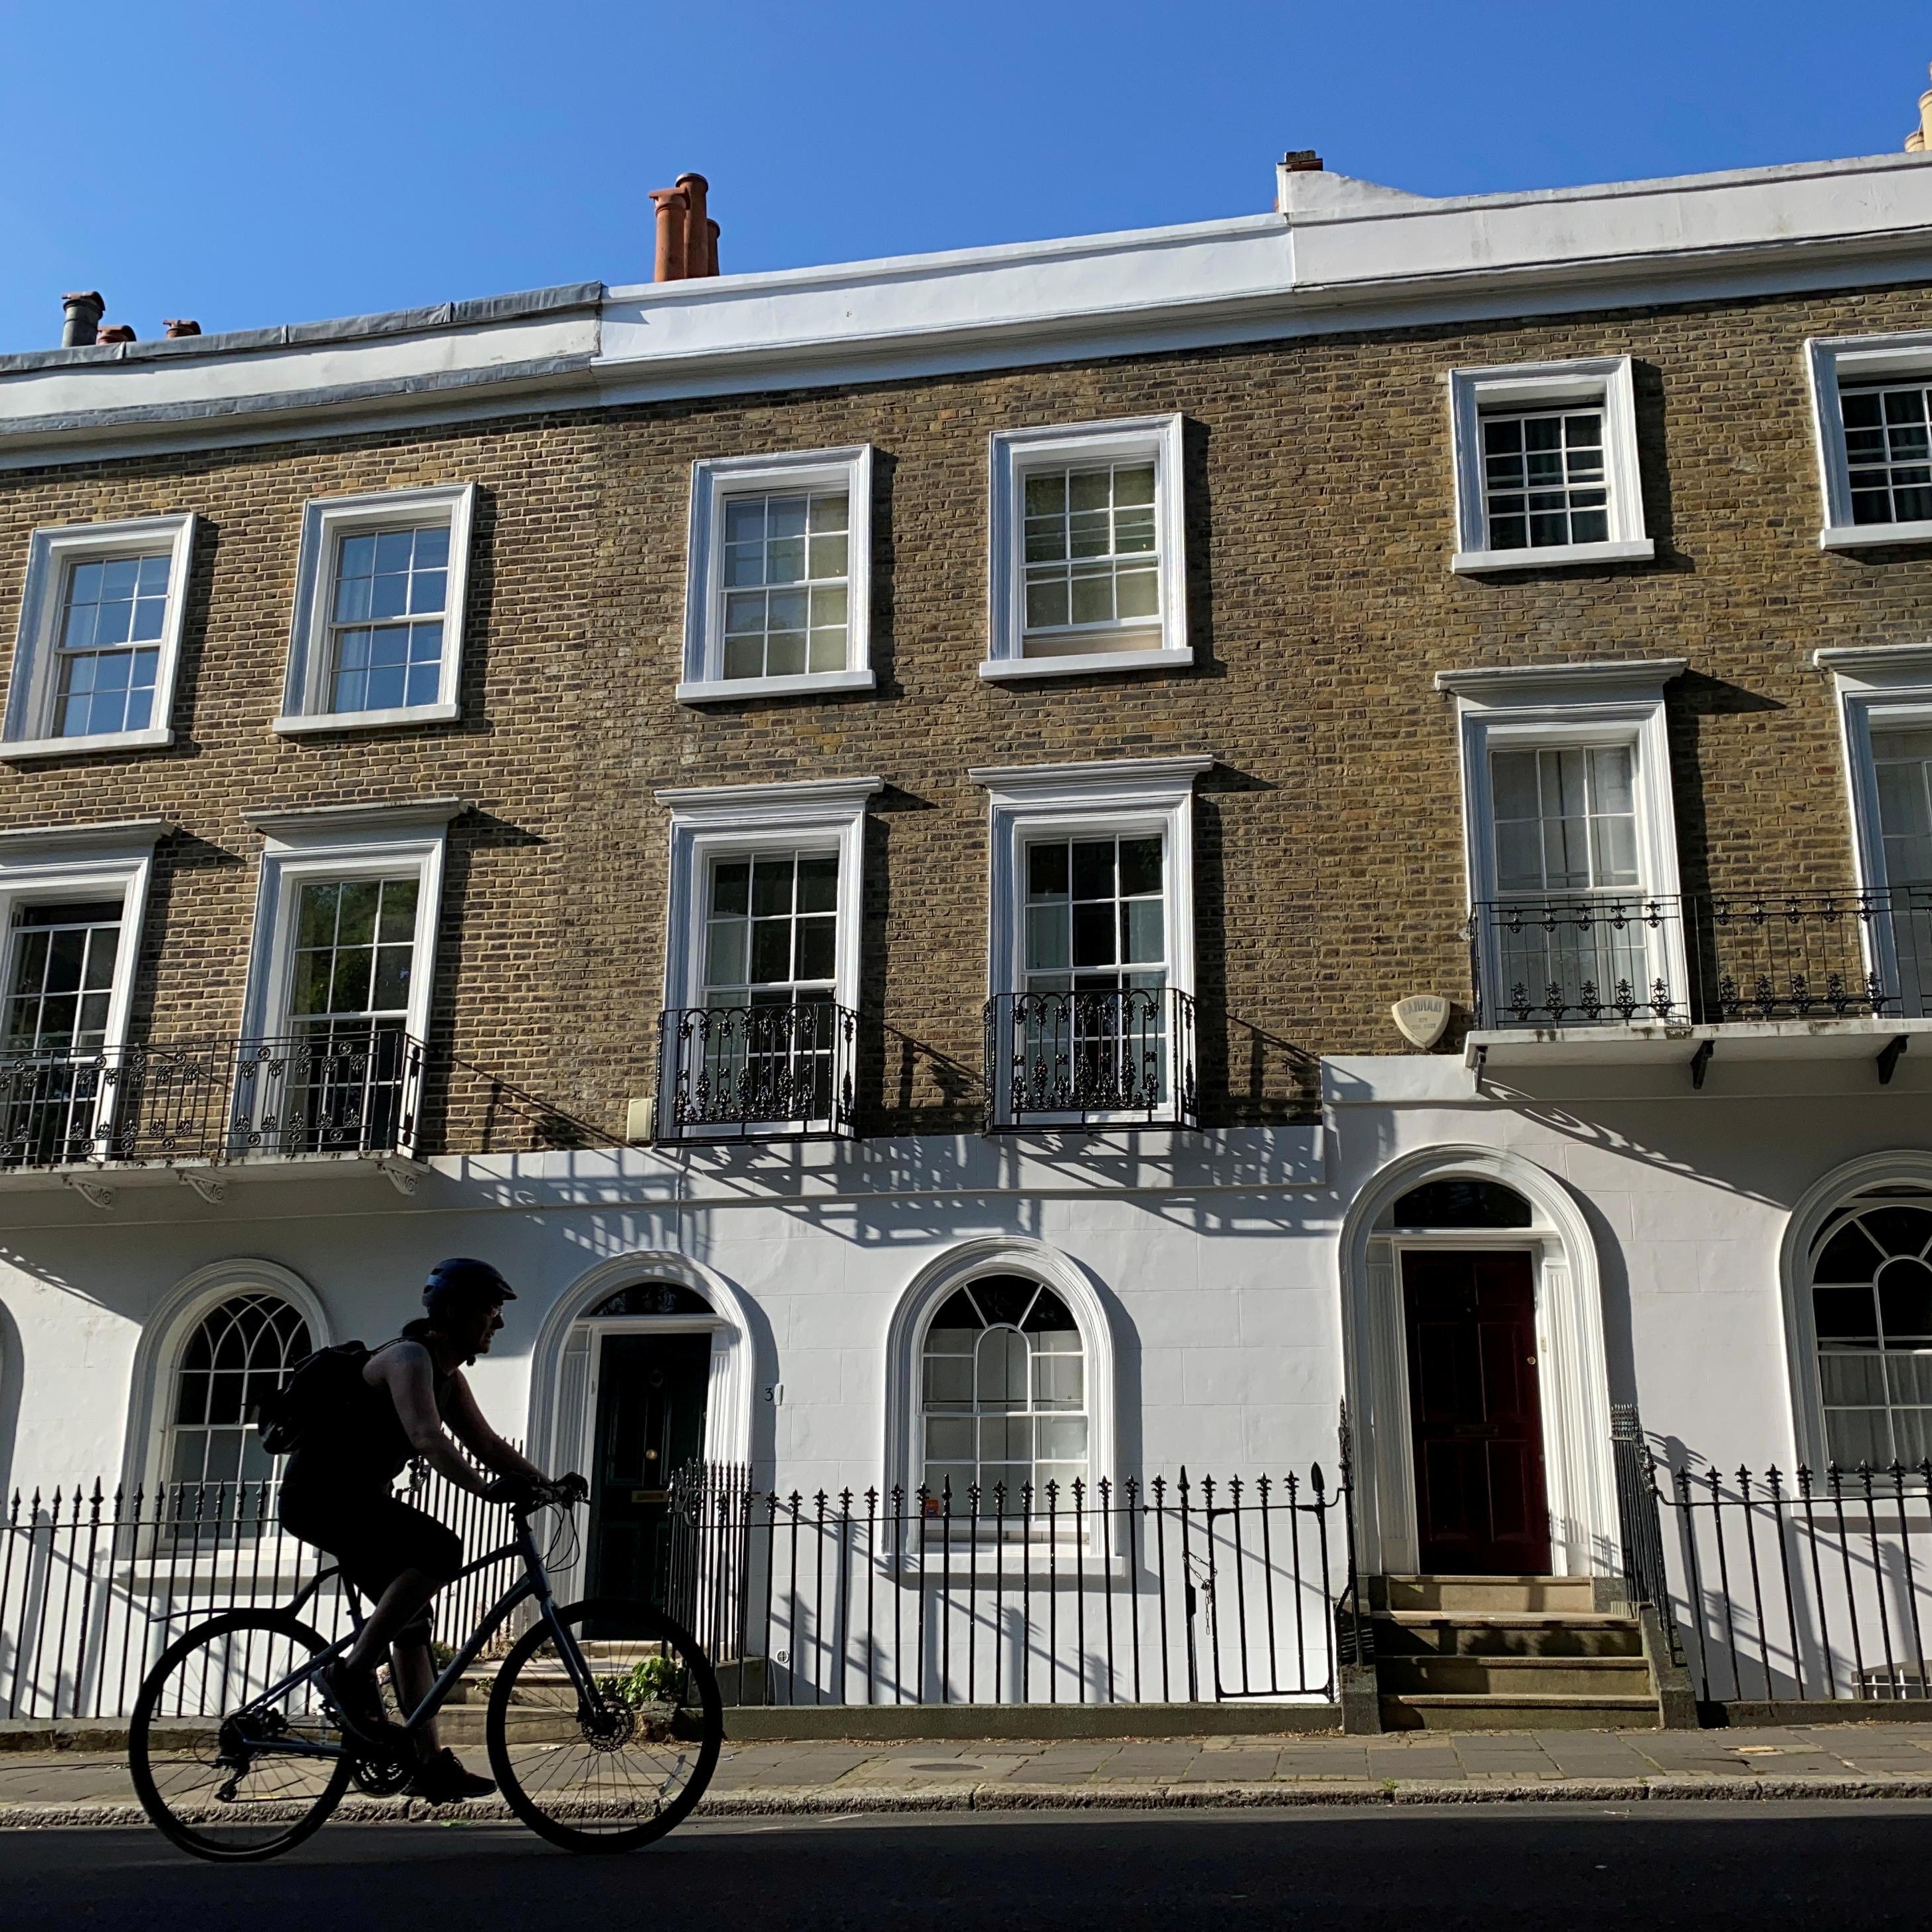 UK house prices rise 0.1% in Sept - Nationwide